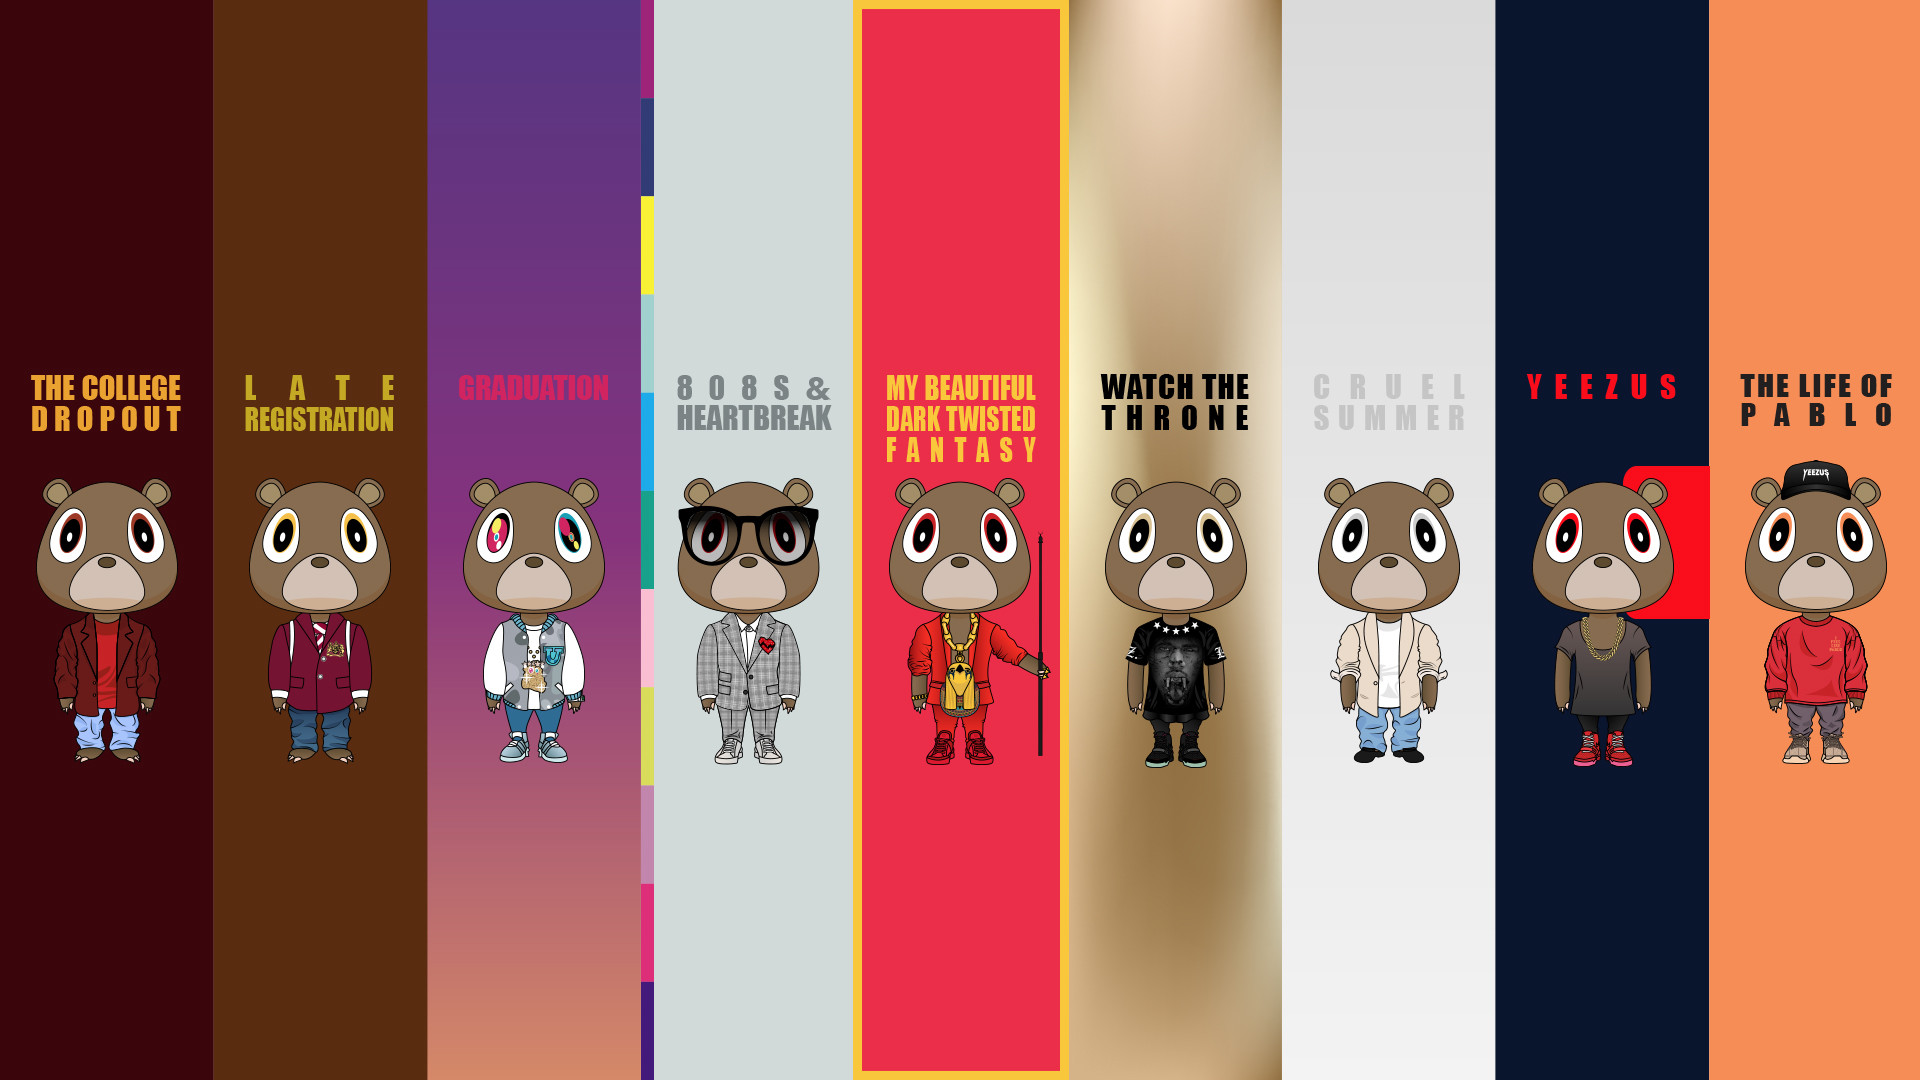 HD wallpaper black and brown bear poster with yellow frame hip hop Kanye  West  Wallpaper Flare